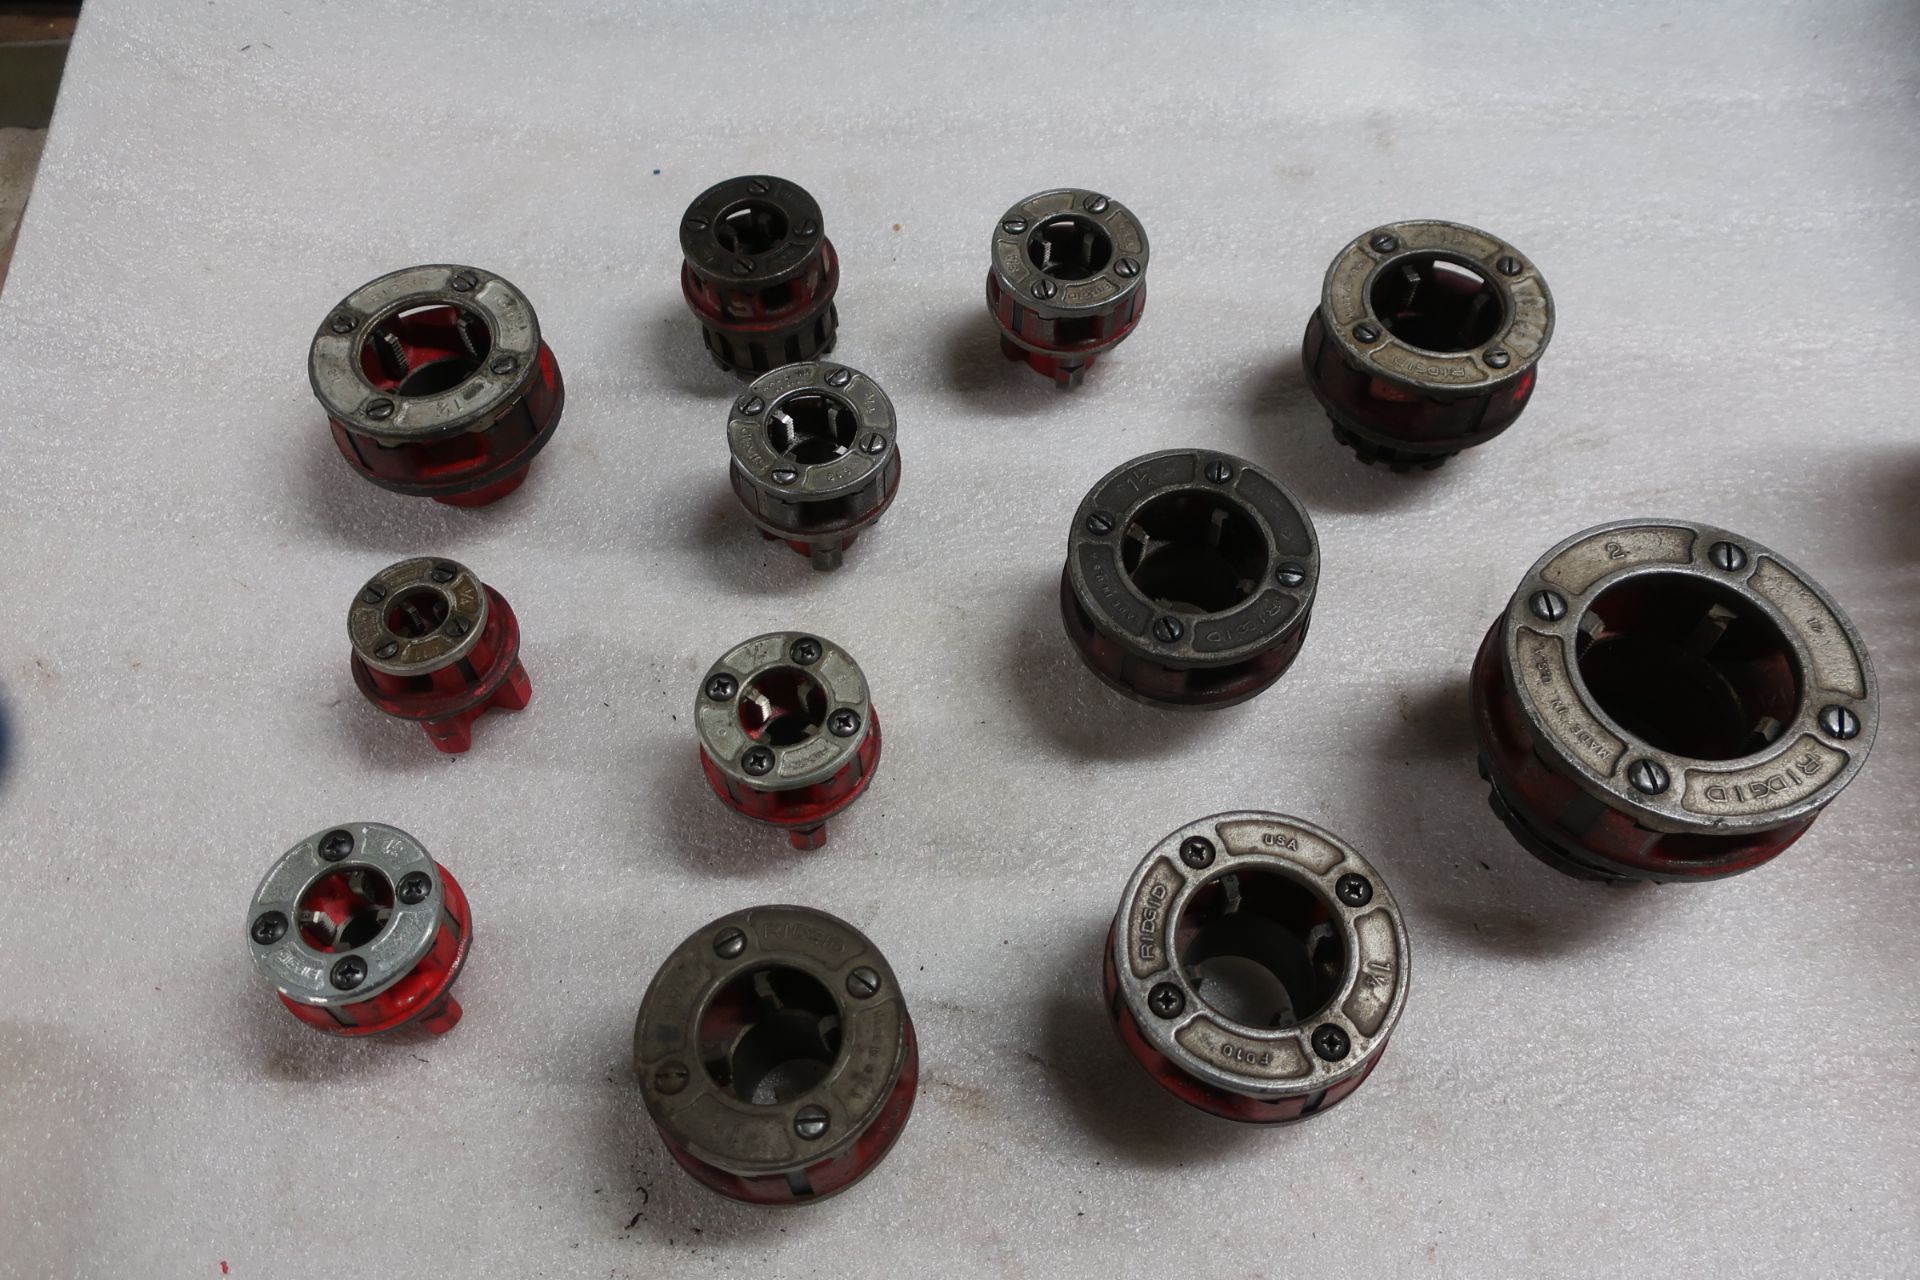 Lot of Ridgid Pipe Threading Dies up to 2" in size